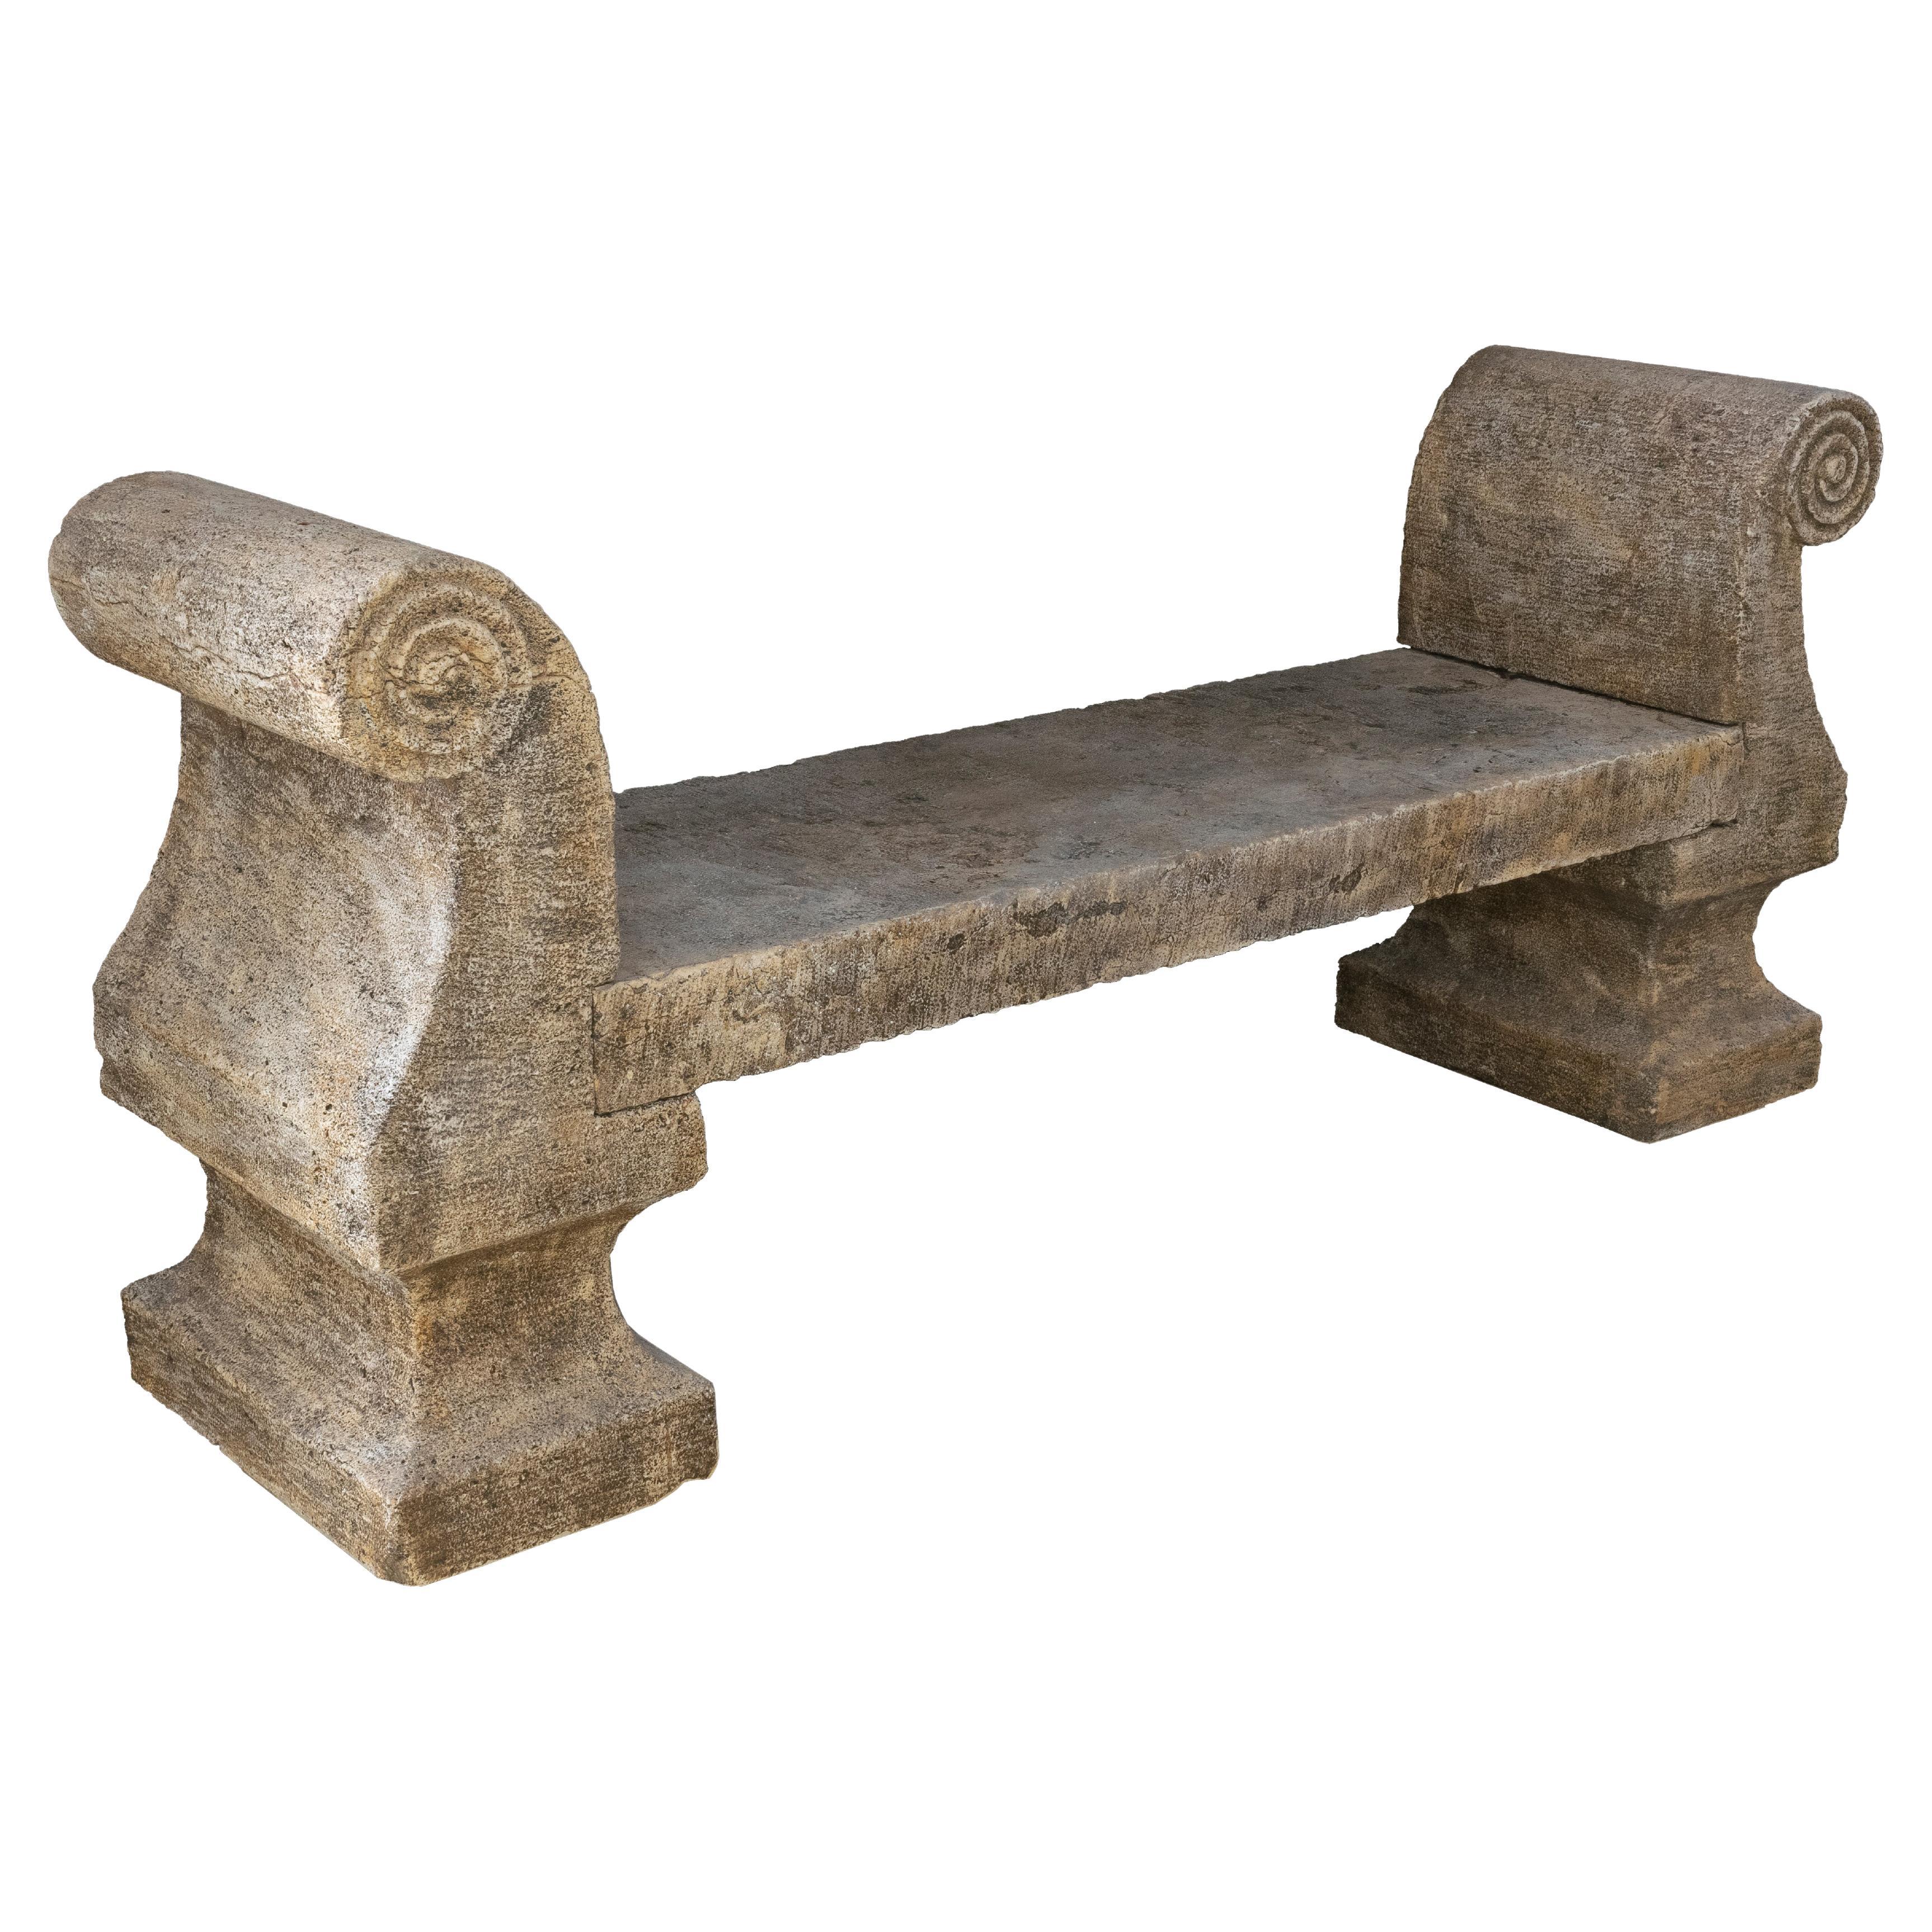 This 19th C. reclaimed limestone bench
It developed a beautiful patina throughout the years.
This Bench is suitable for interior and exterior applications,
and could withstand extreme Temperatures and Freezing weathers.